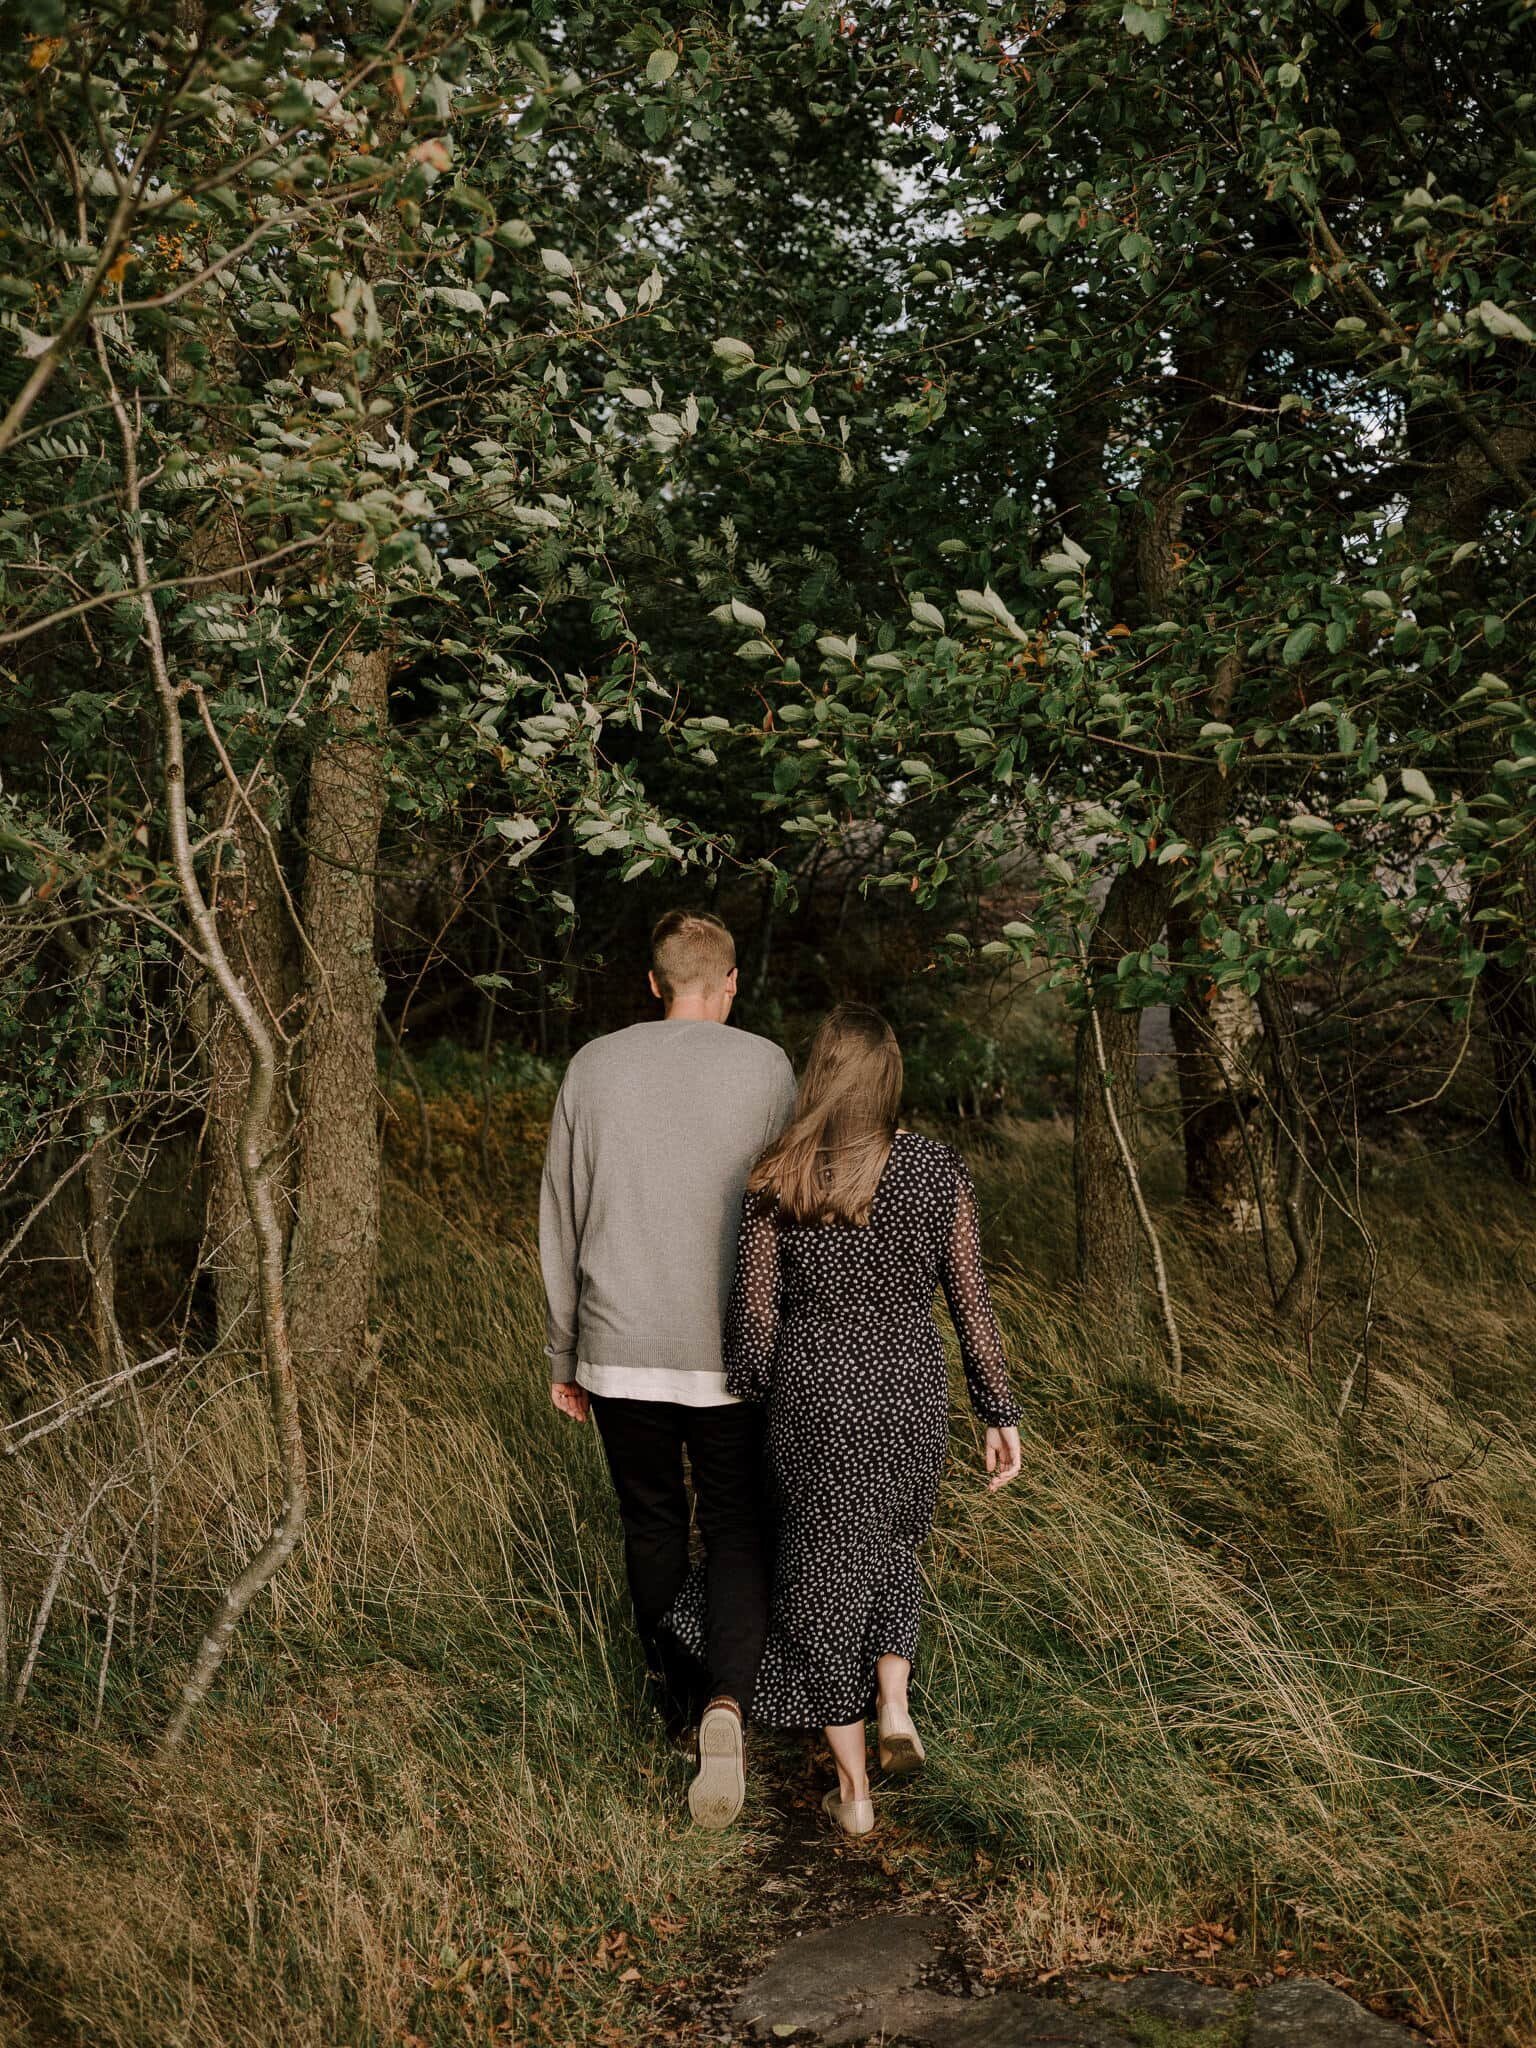 Couple walking in to the woods together